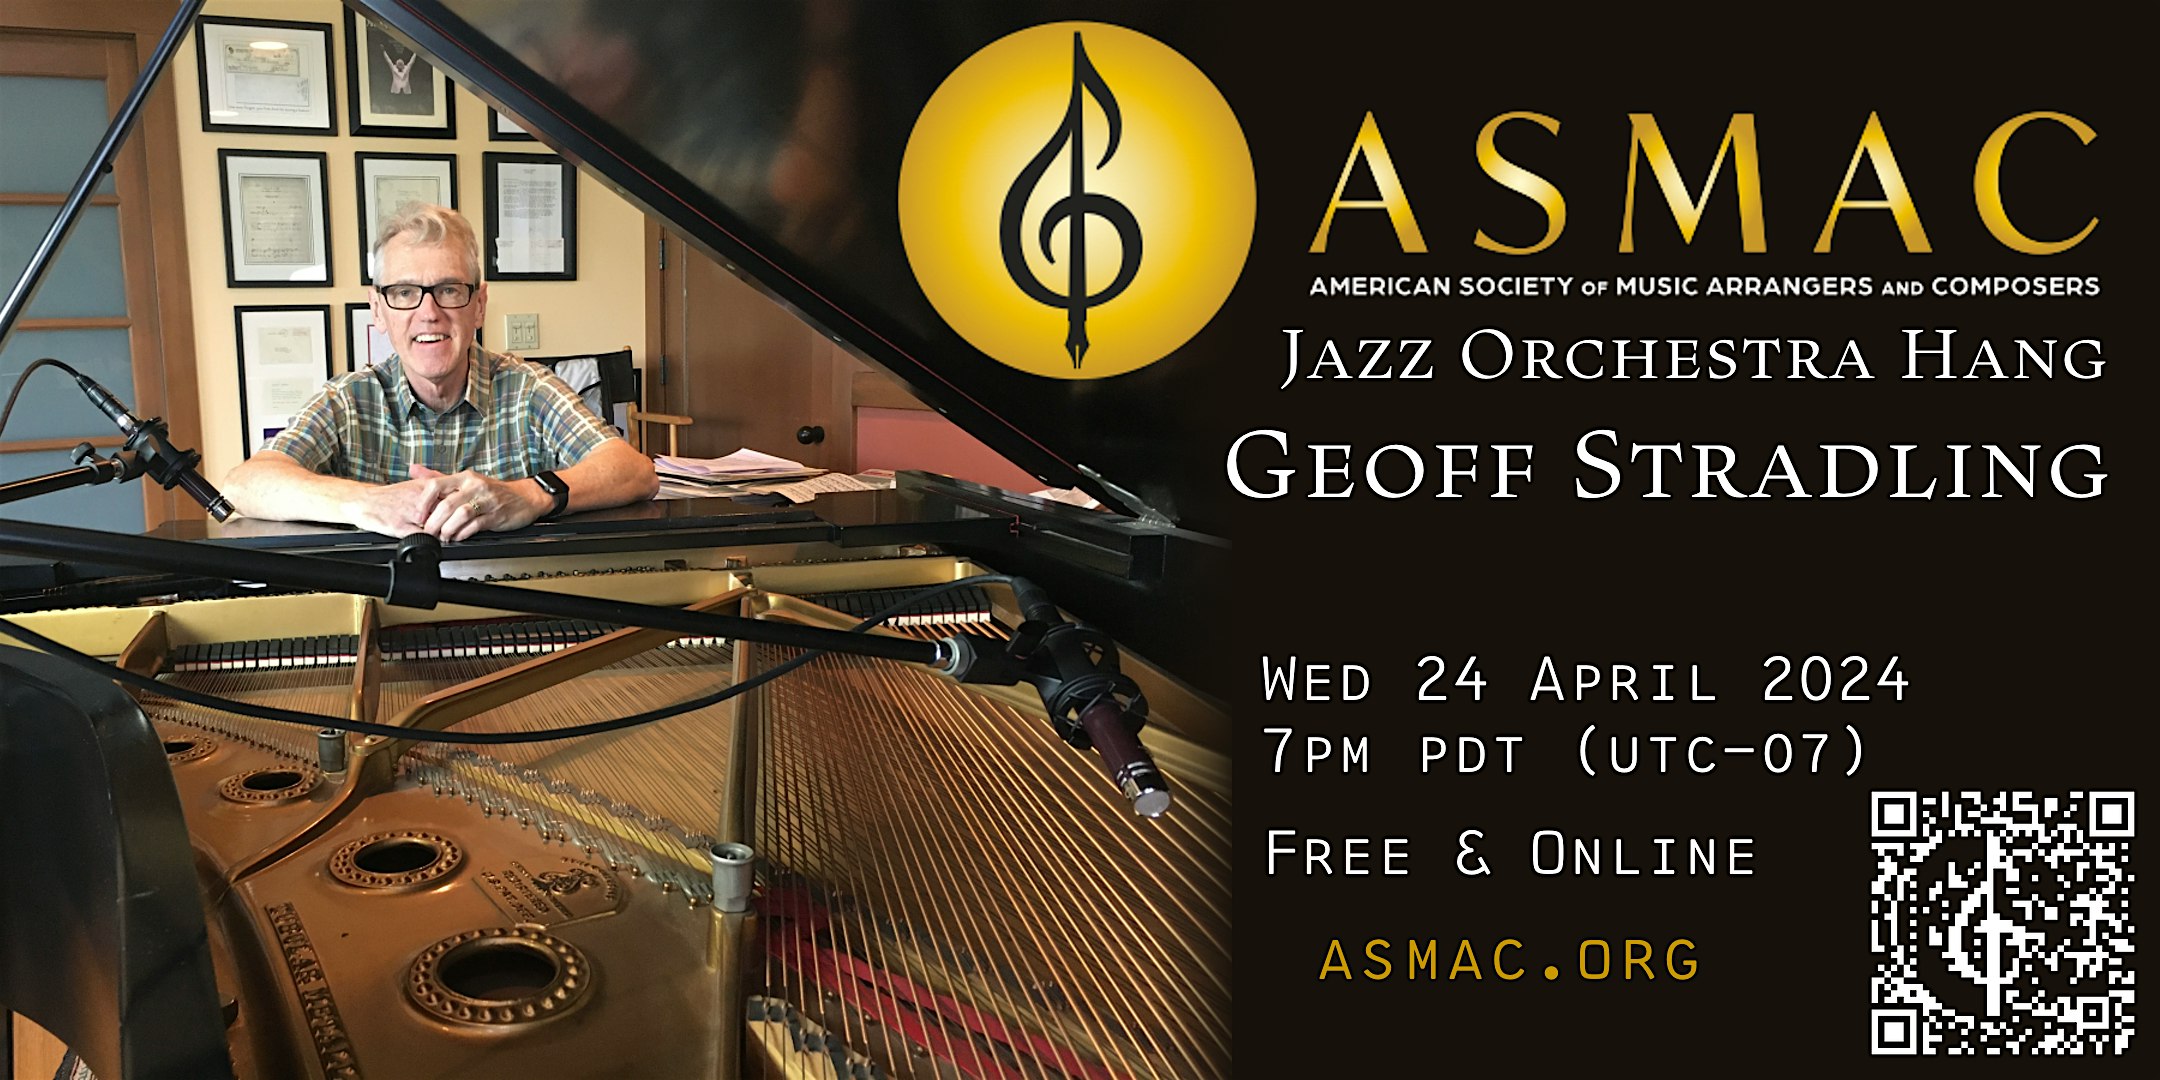 ASMAC Jazz Orchestra Hang with Geoff Stradling